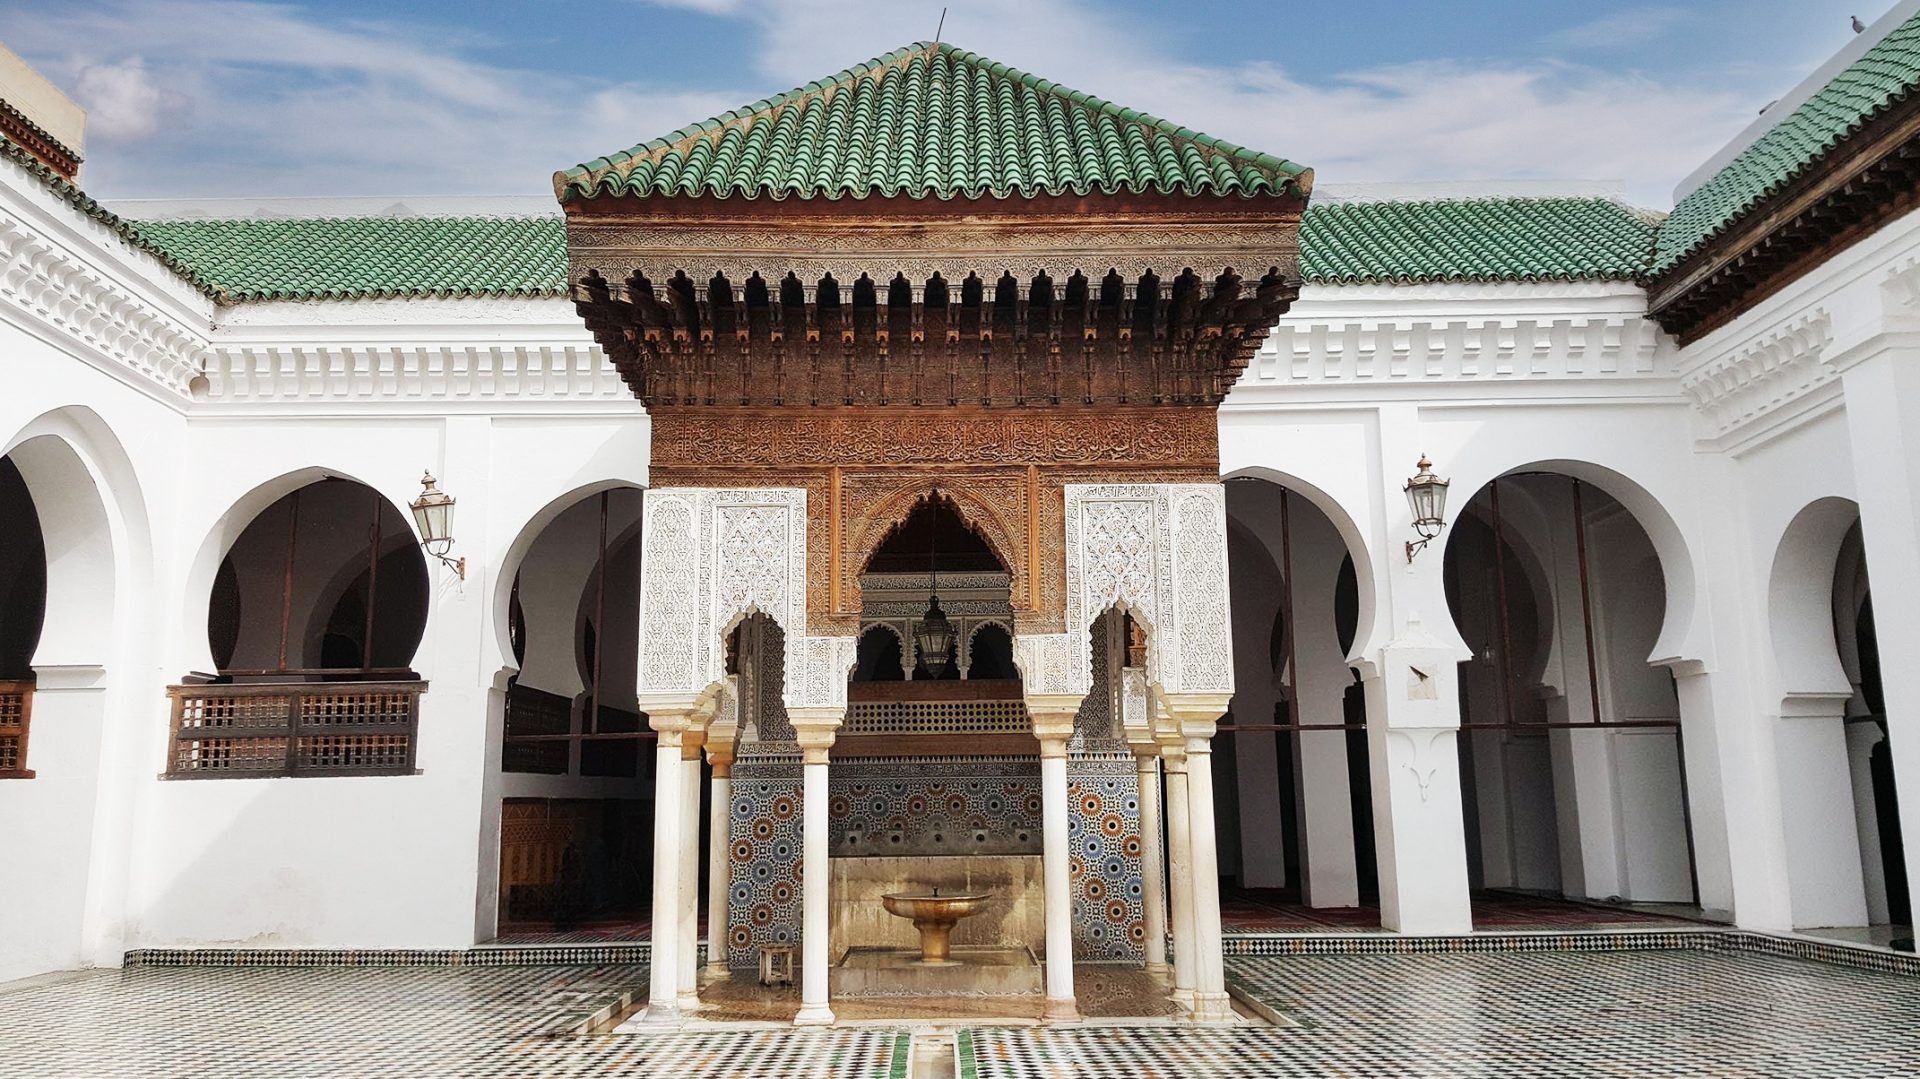 A courtyard in a Moroccan Al-Qarawiyyin University with a fountain, arches, columns, and colorful tiles.